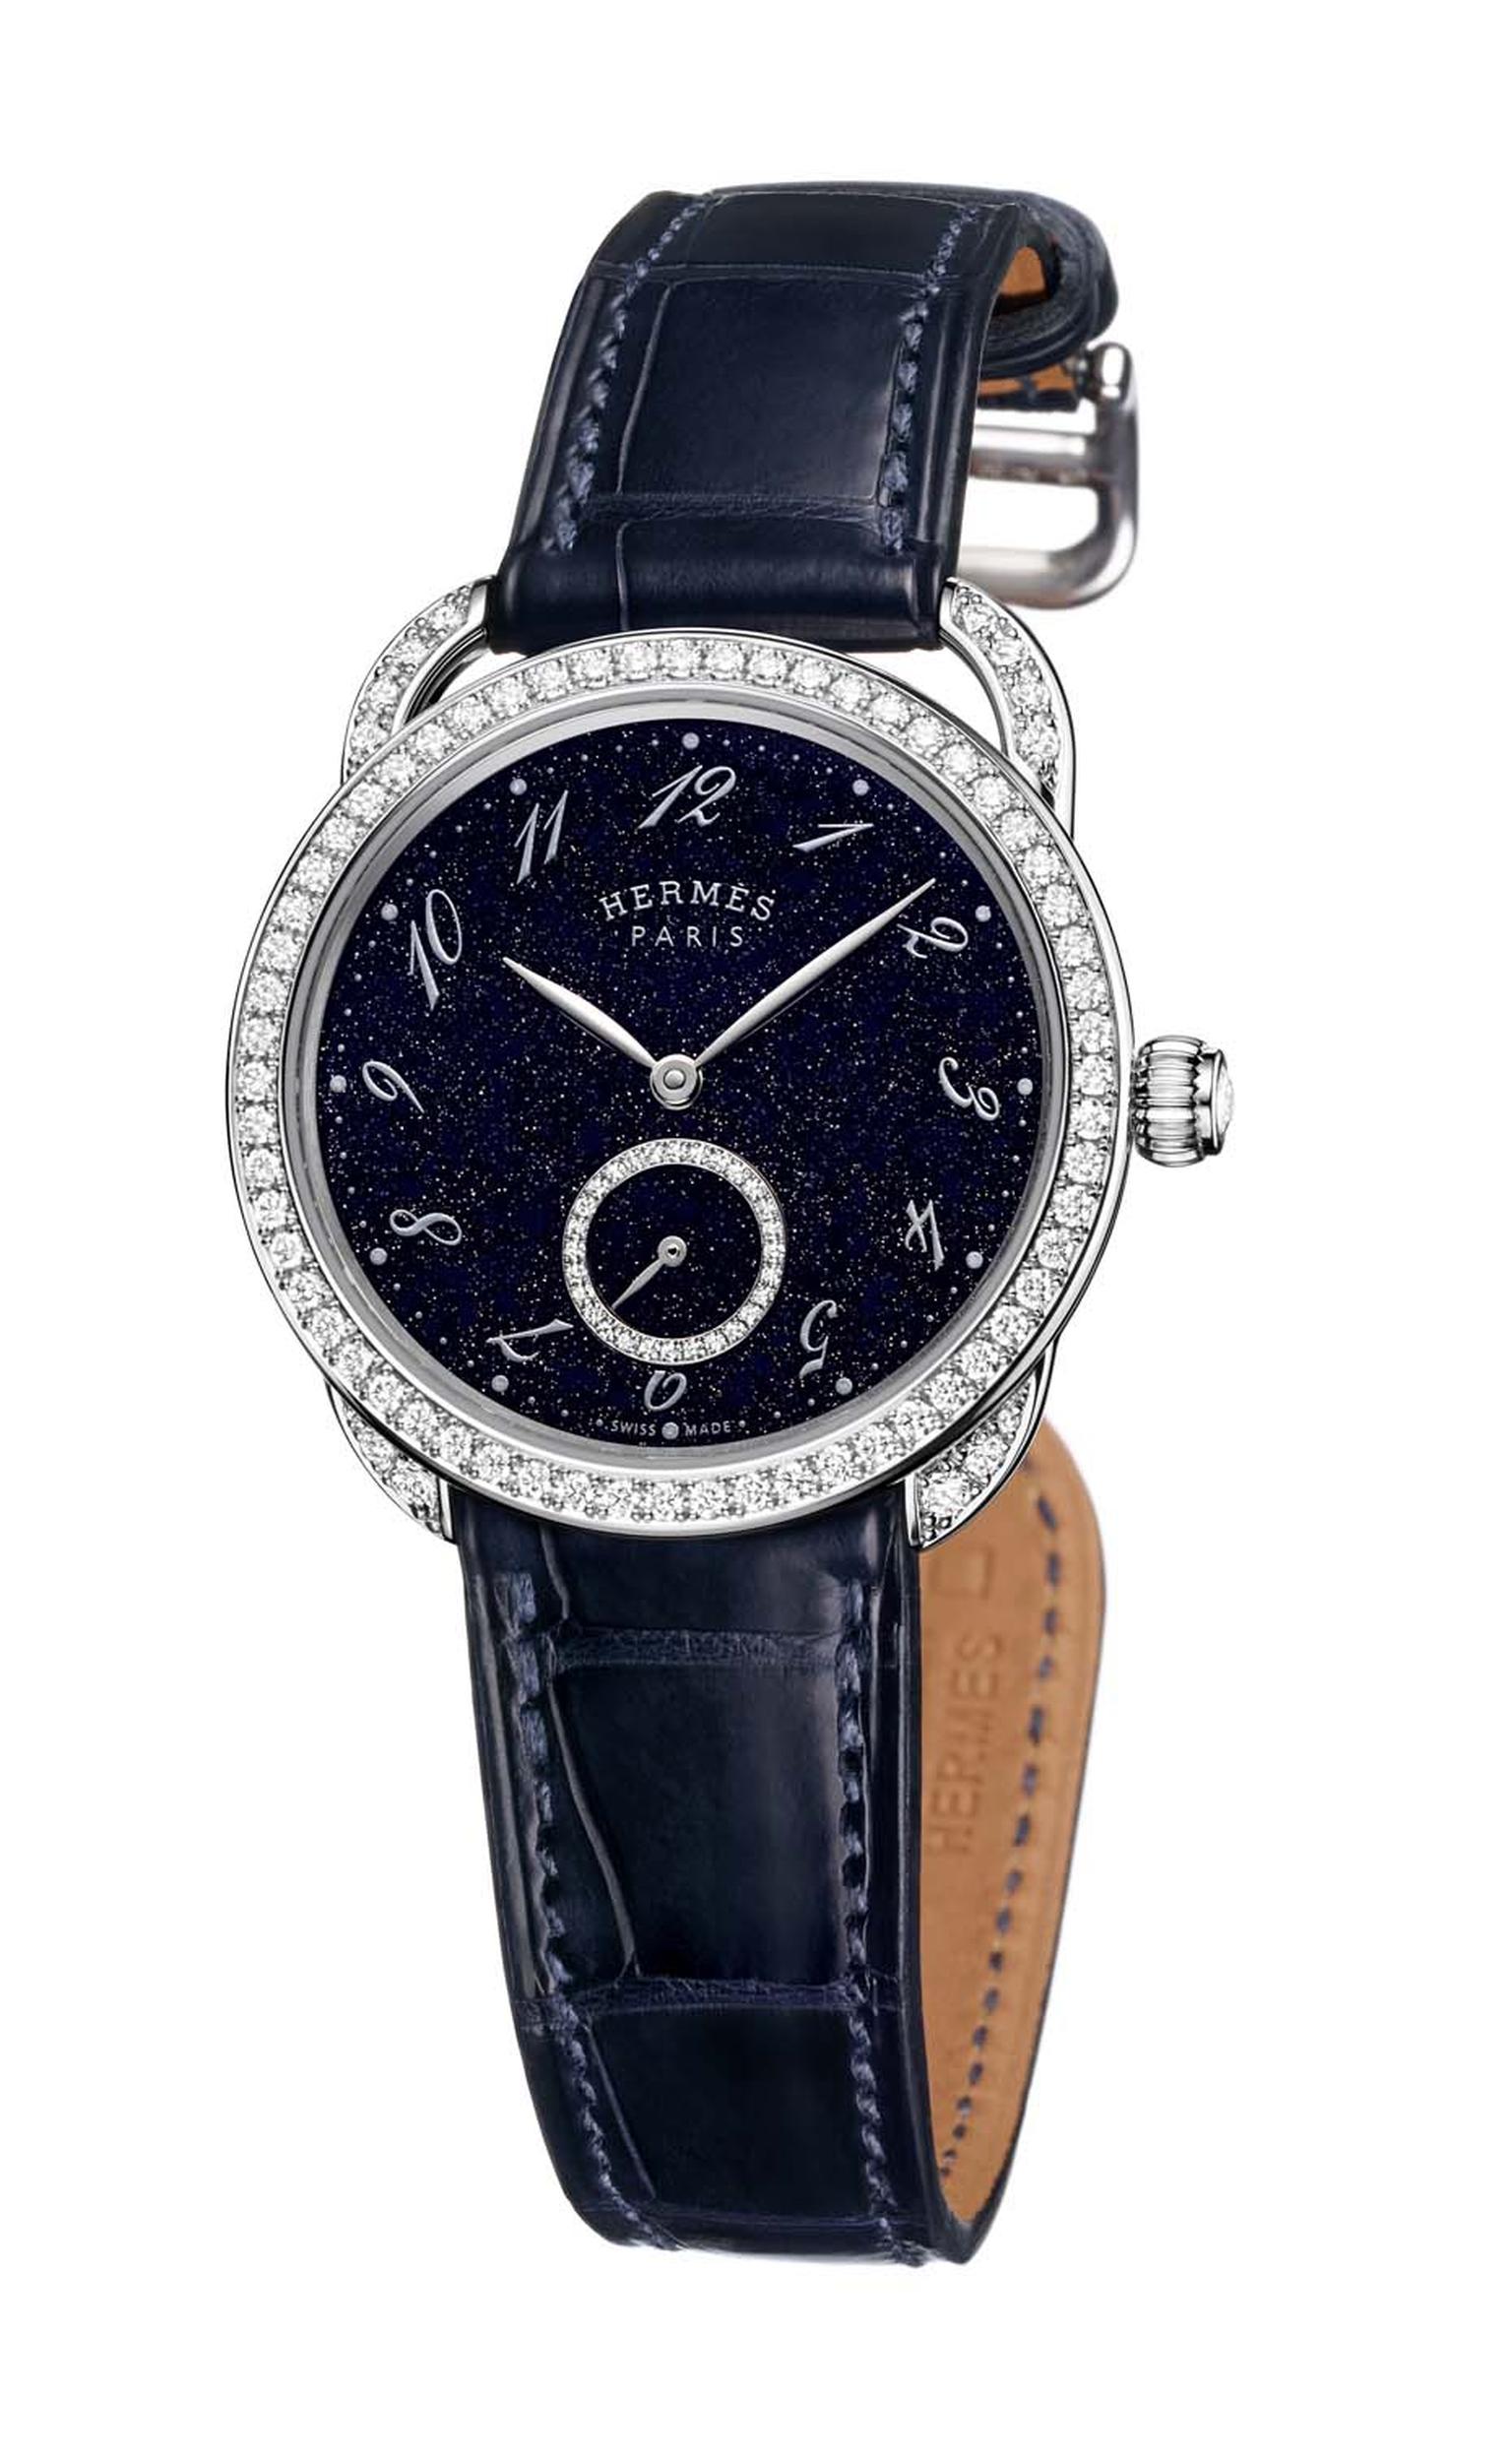 The Hermès Arceau Ecuyère Aventurine ladies’ watch is a romantic ode to the night sky. The aventurine stone dial, sparkling with its natural metallic inclusions, recreates the effect of a dark blue sky, highlighted by a constellation of white diamonds on 